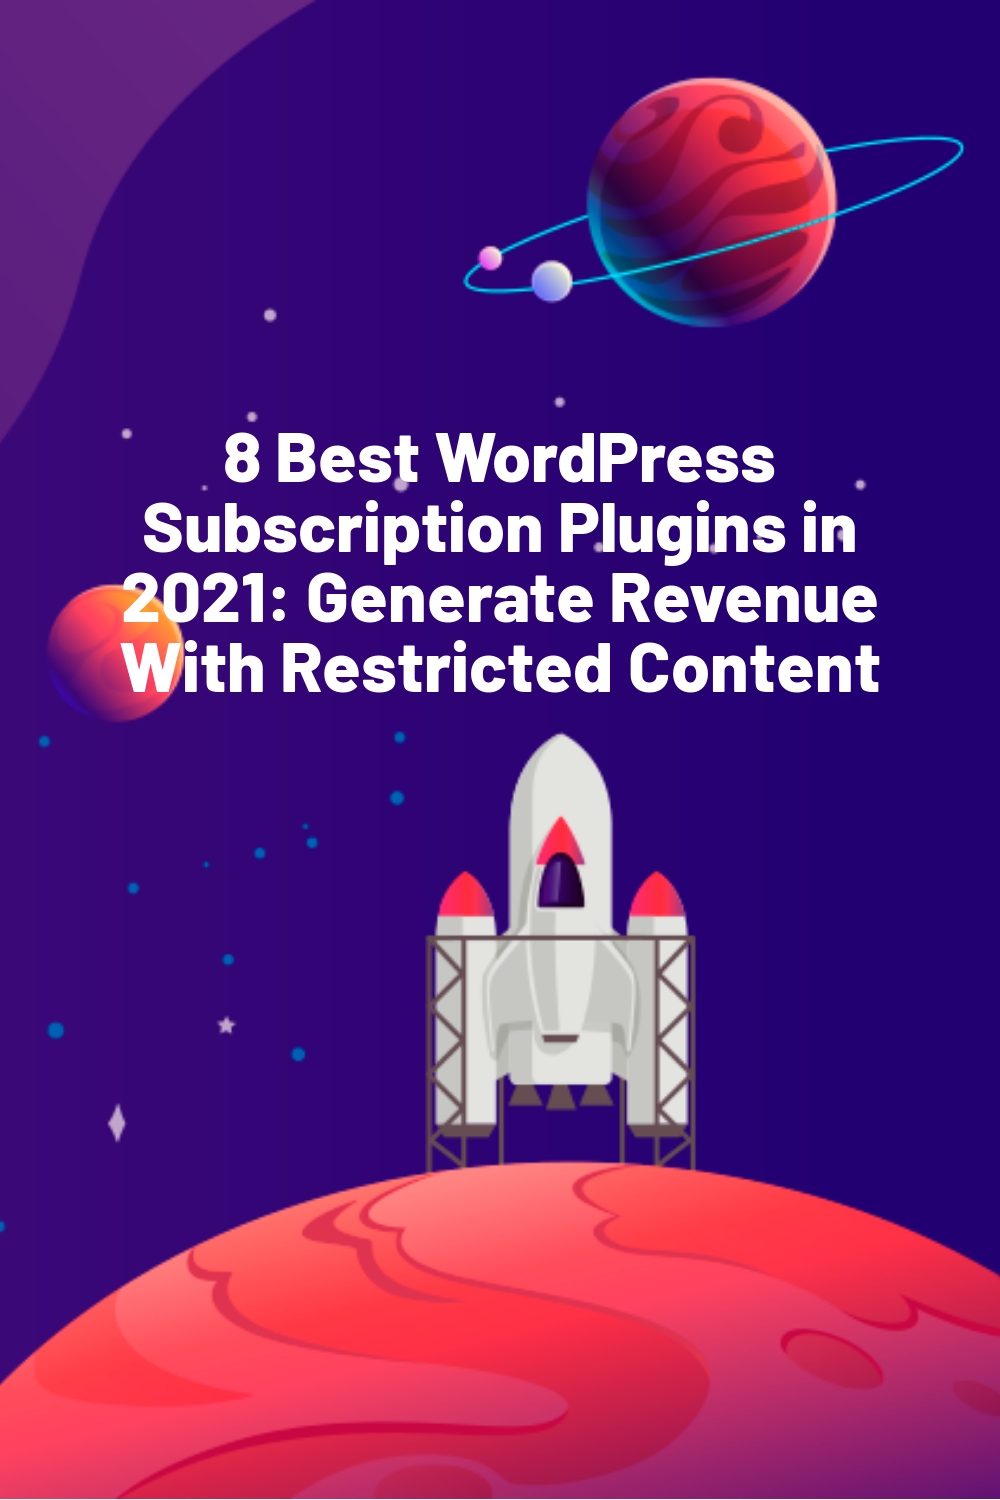 8 Best WordPress Subscription Plugins in 2021: Generate Revenue With Restricted Content